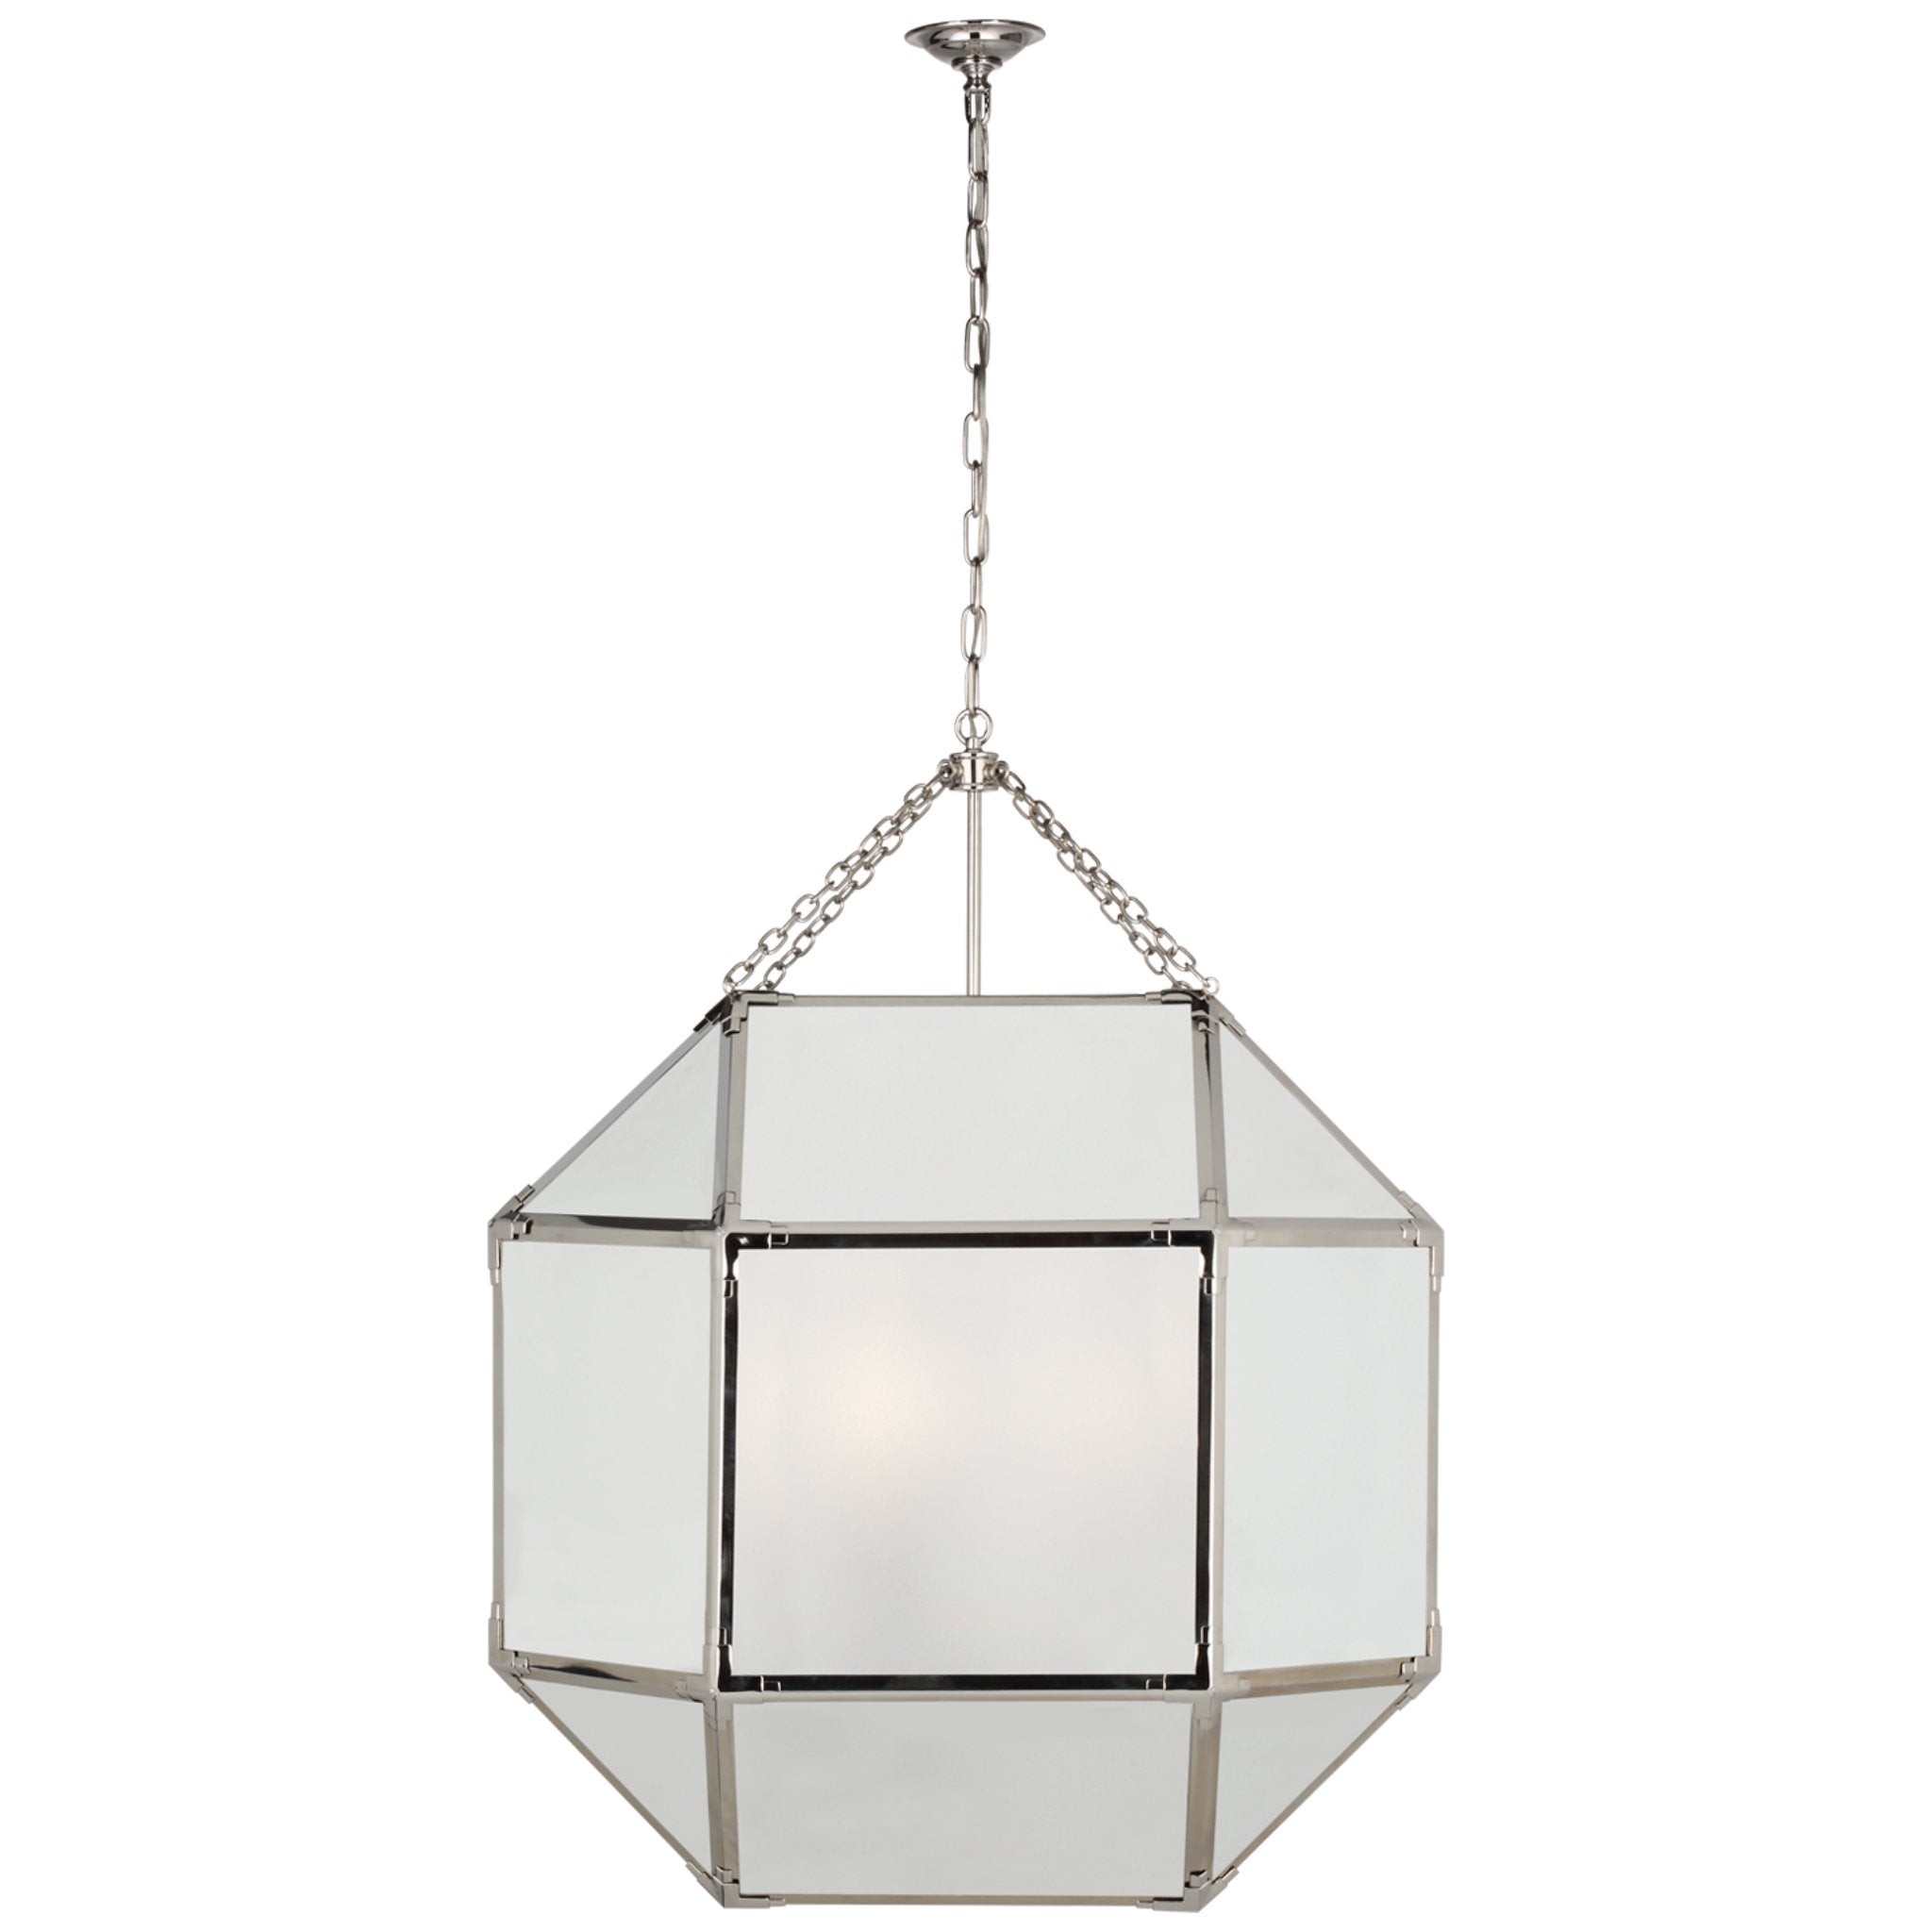 Suzanne Kasler Morris Grande Lantern in Polished Nickel with Frosted Glass